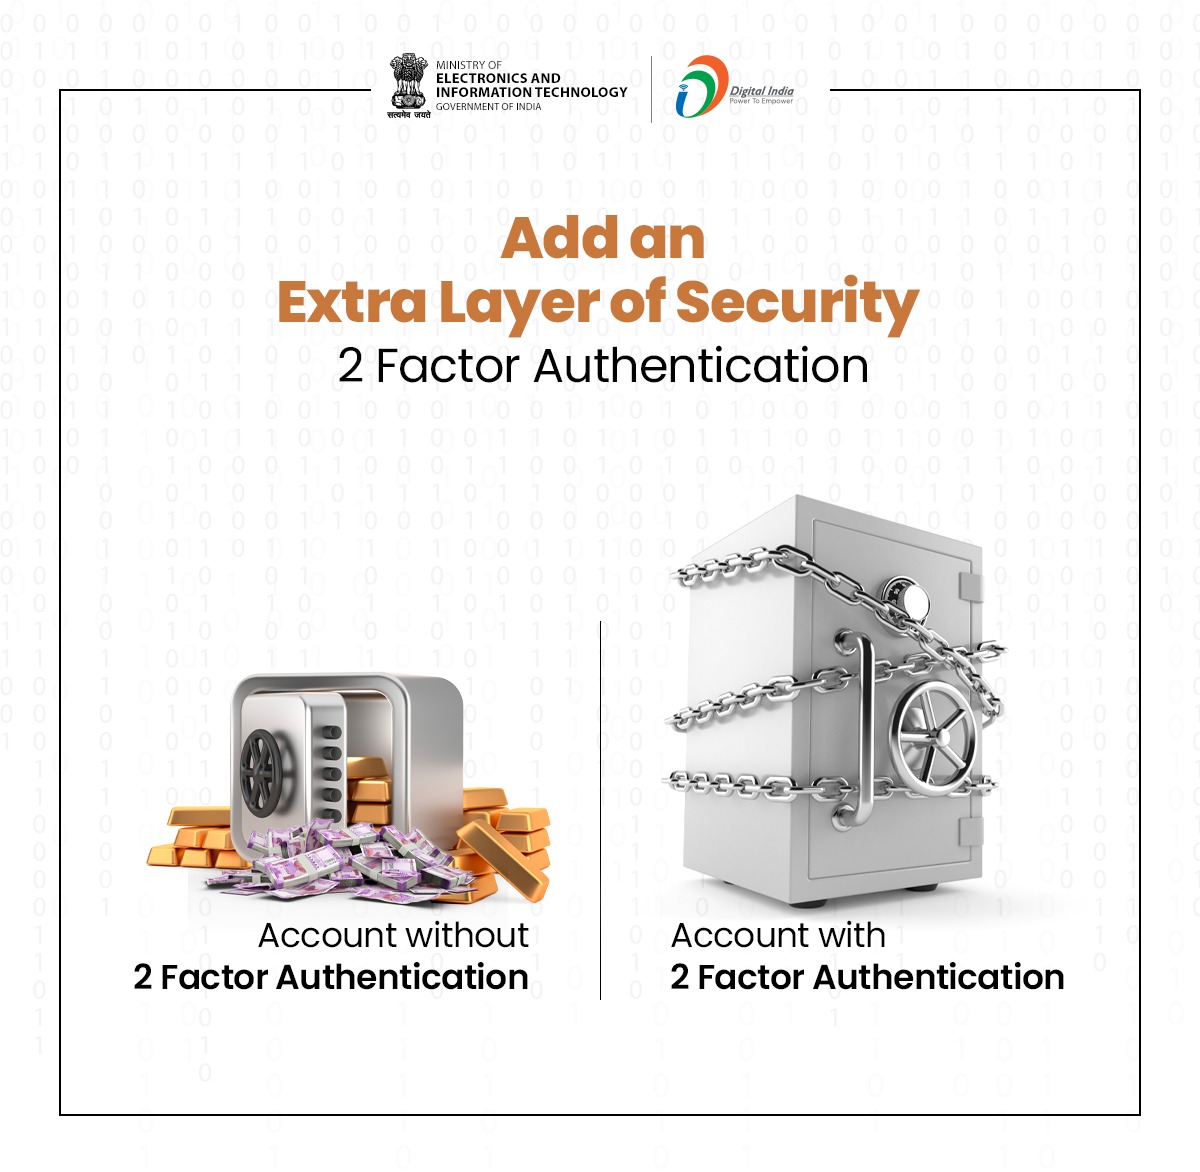 Secure your accounts! Enable two-factor authentication for an extra layer of protection. Keep hackers out. 🛡️🔐#DataSecurity #CyberSafetyTips #DigitalIndia